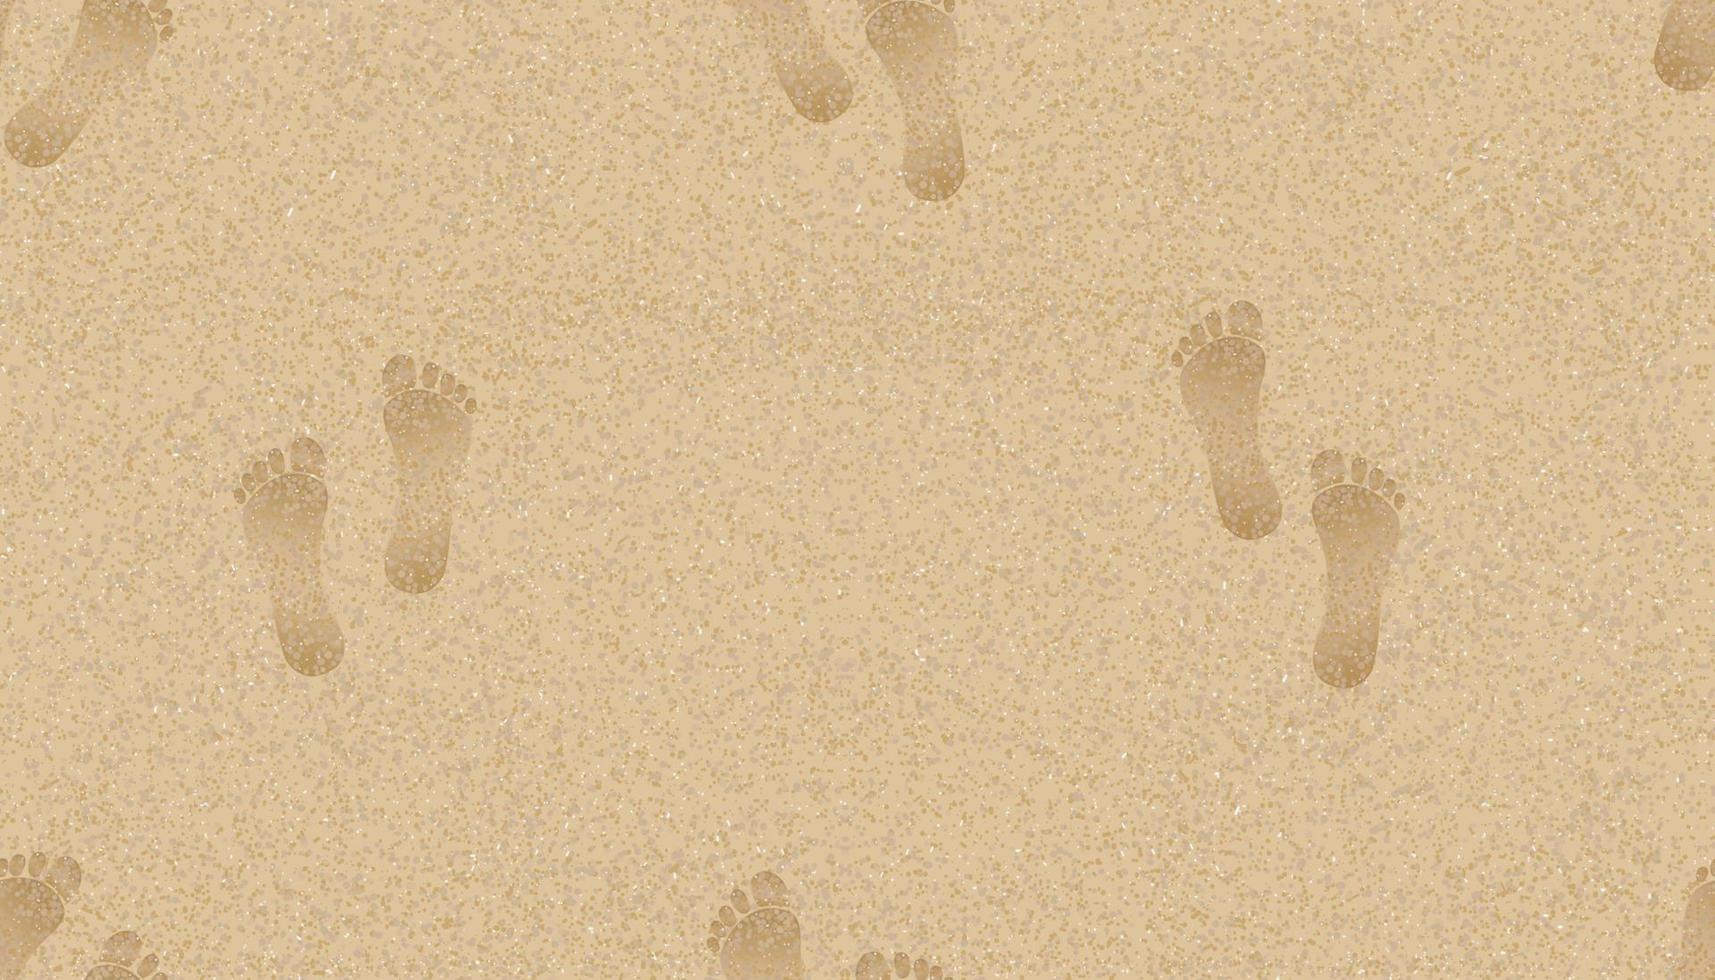 Seamless pattern Texture background Footprints of human feet on the Sand Beach background.Vector illustration Backdrop Endless Brown Beach sand dune with barefoot for Summer banner background. vector